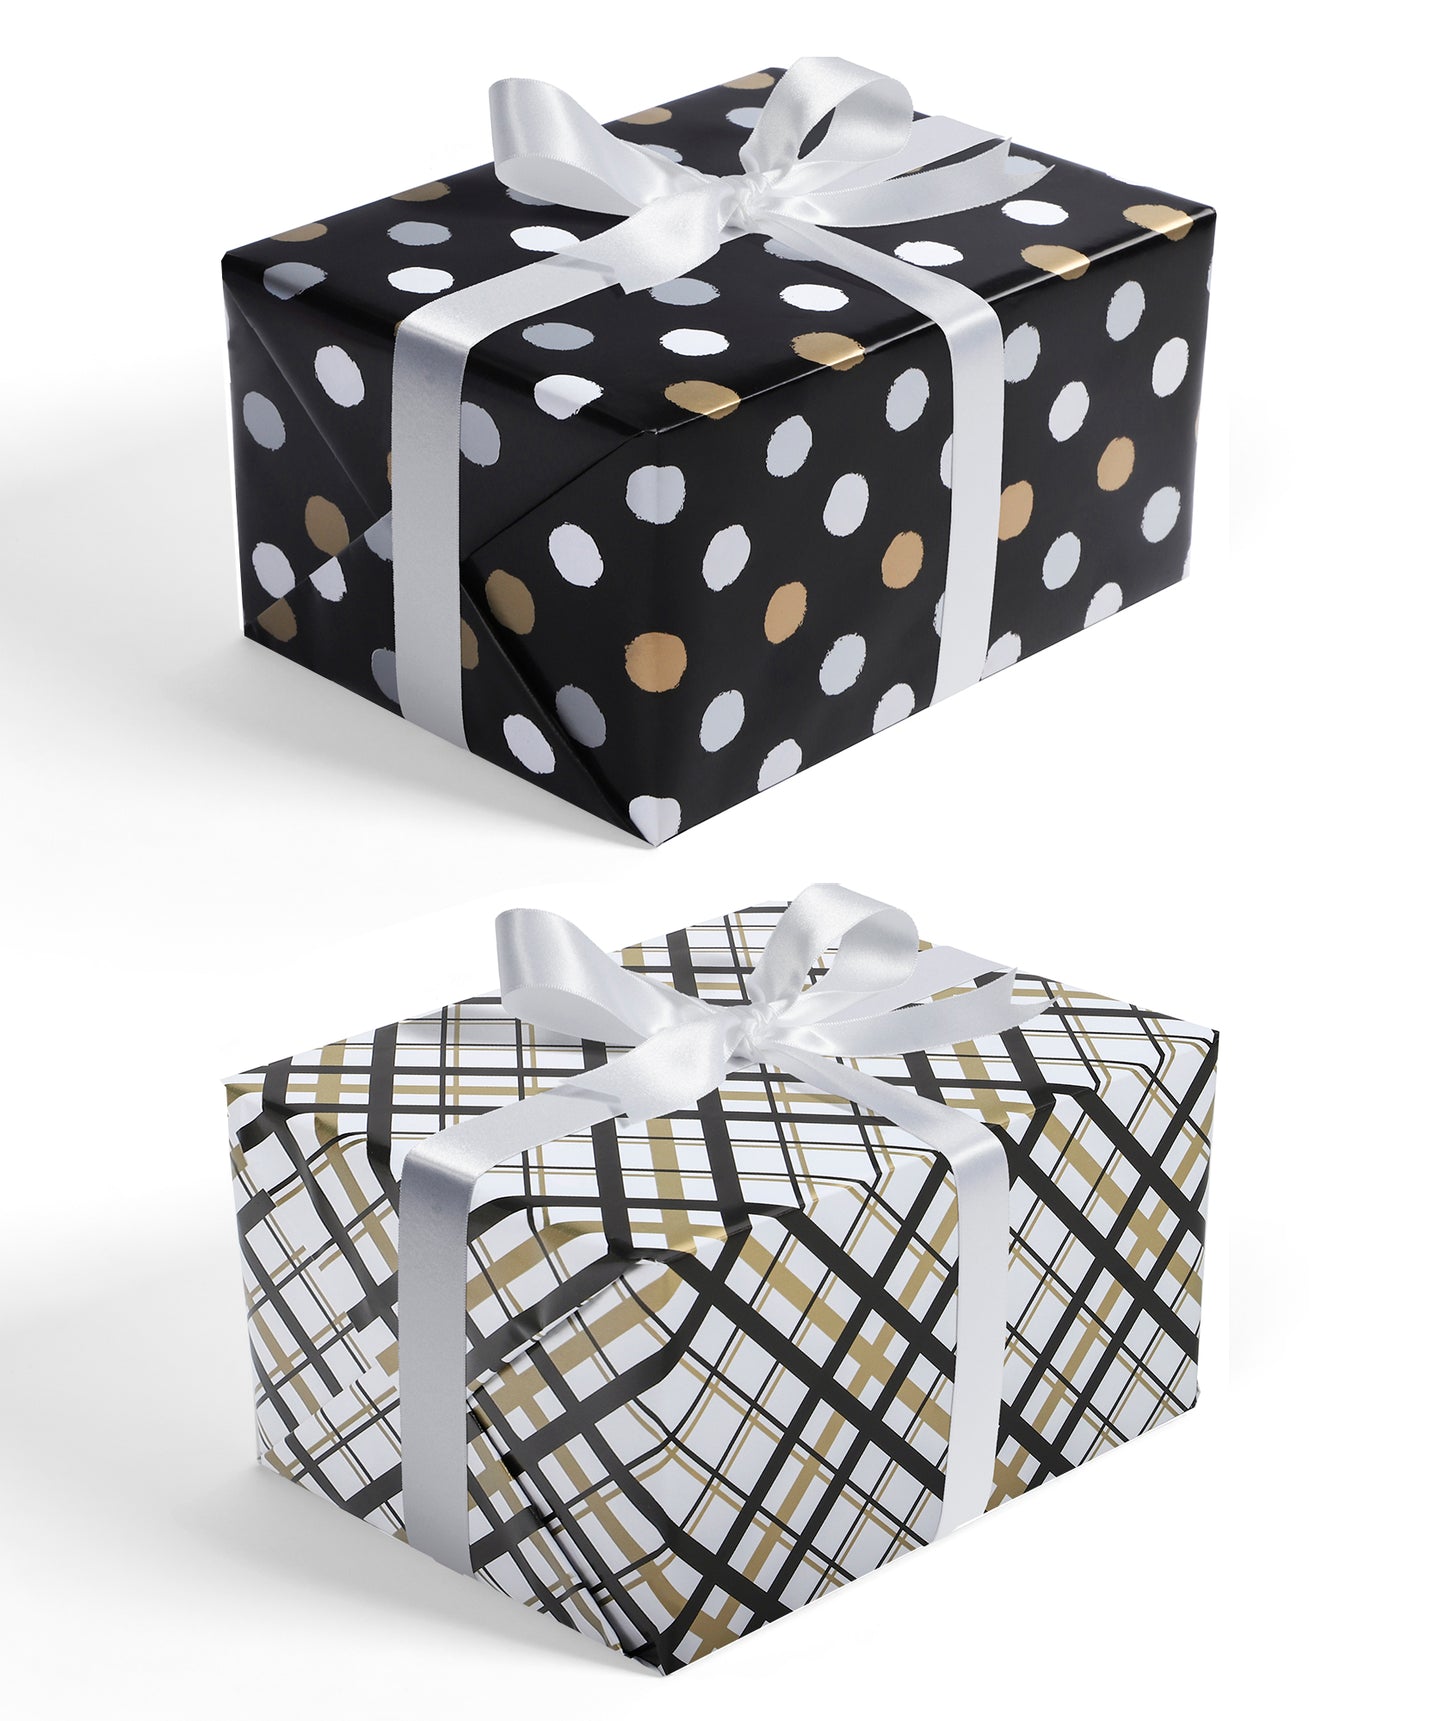 Black & Gold Polka Dot Wrapping Paper with Plaid Jumbo Roll Wholesale Wrapaholic